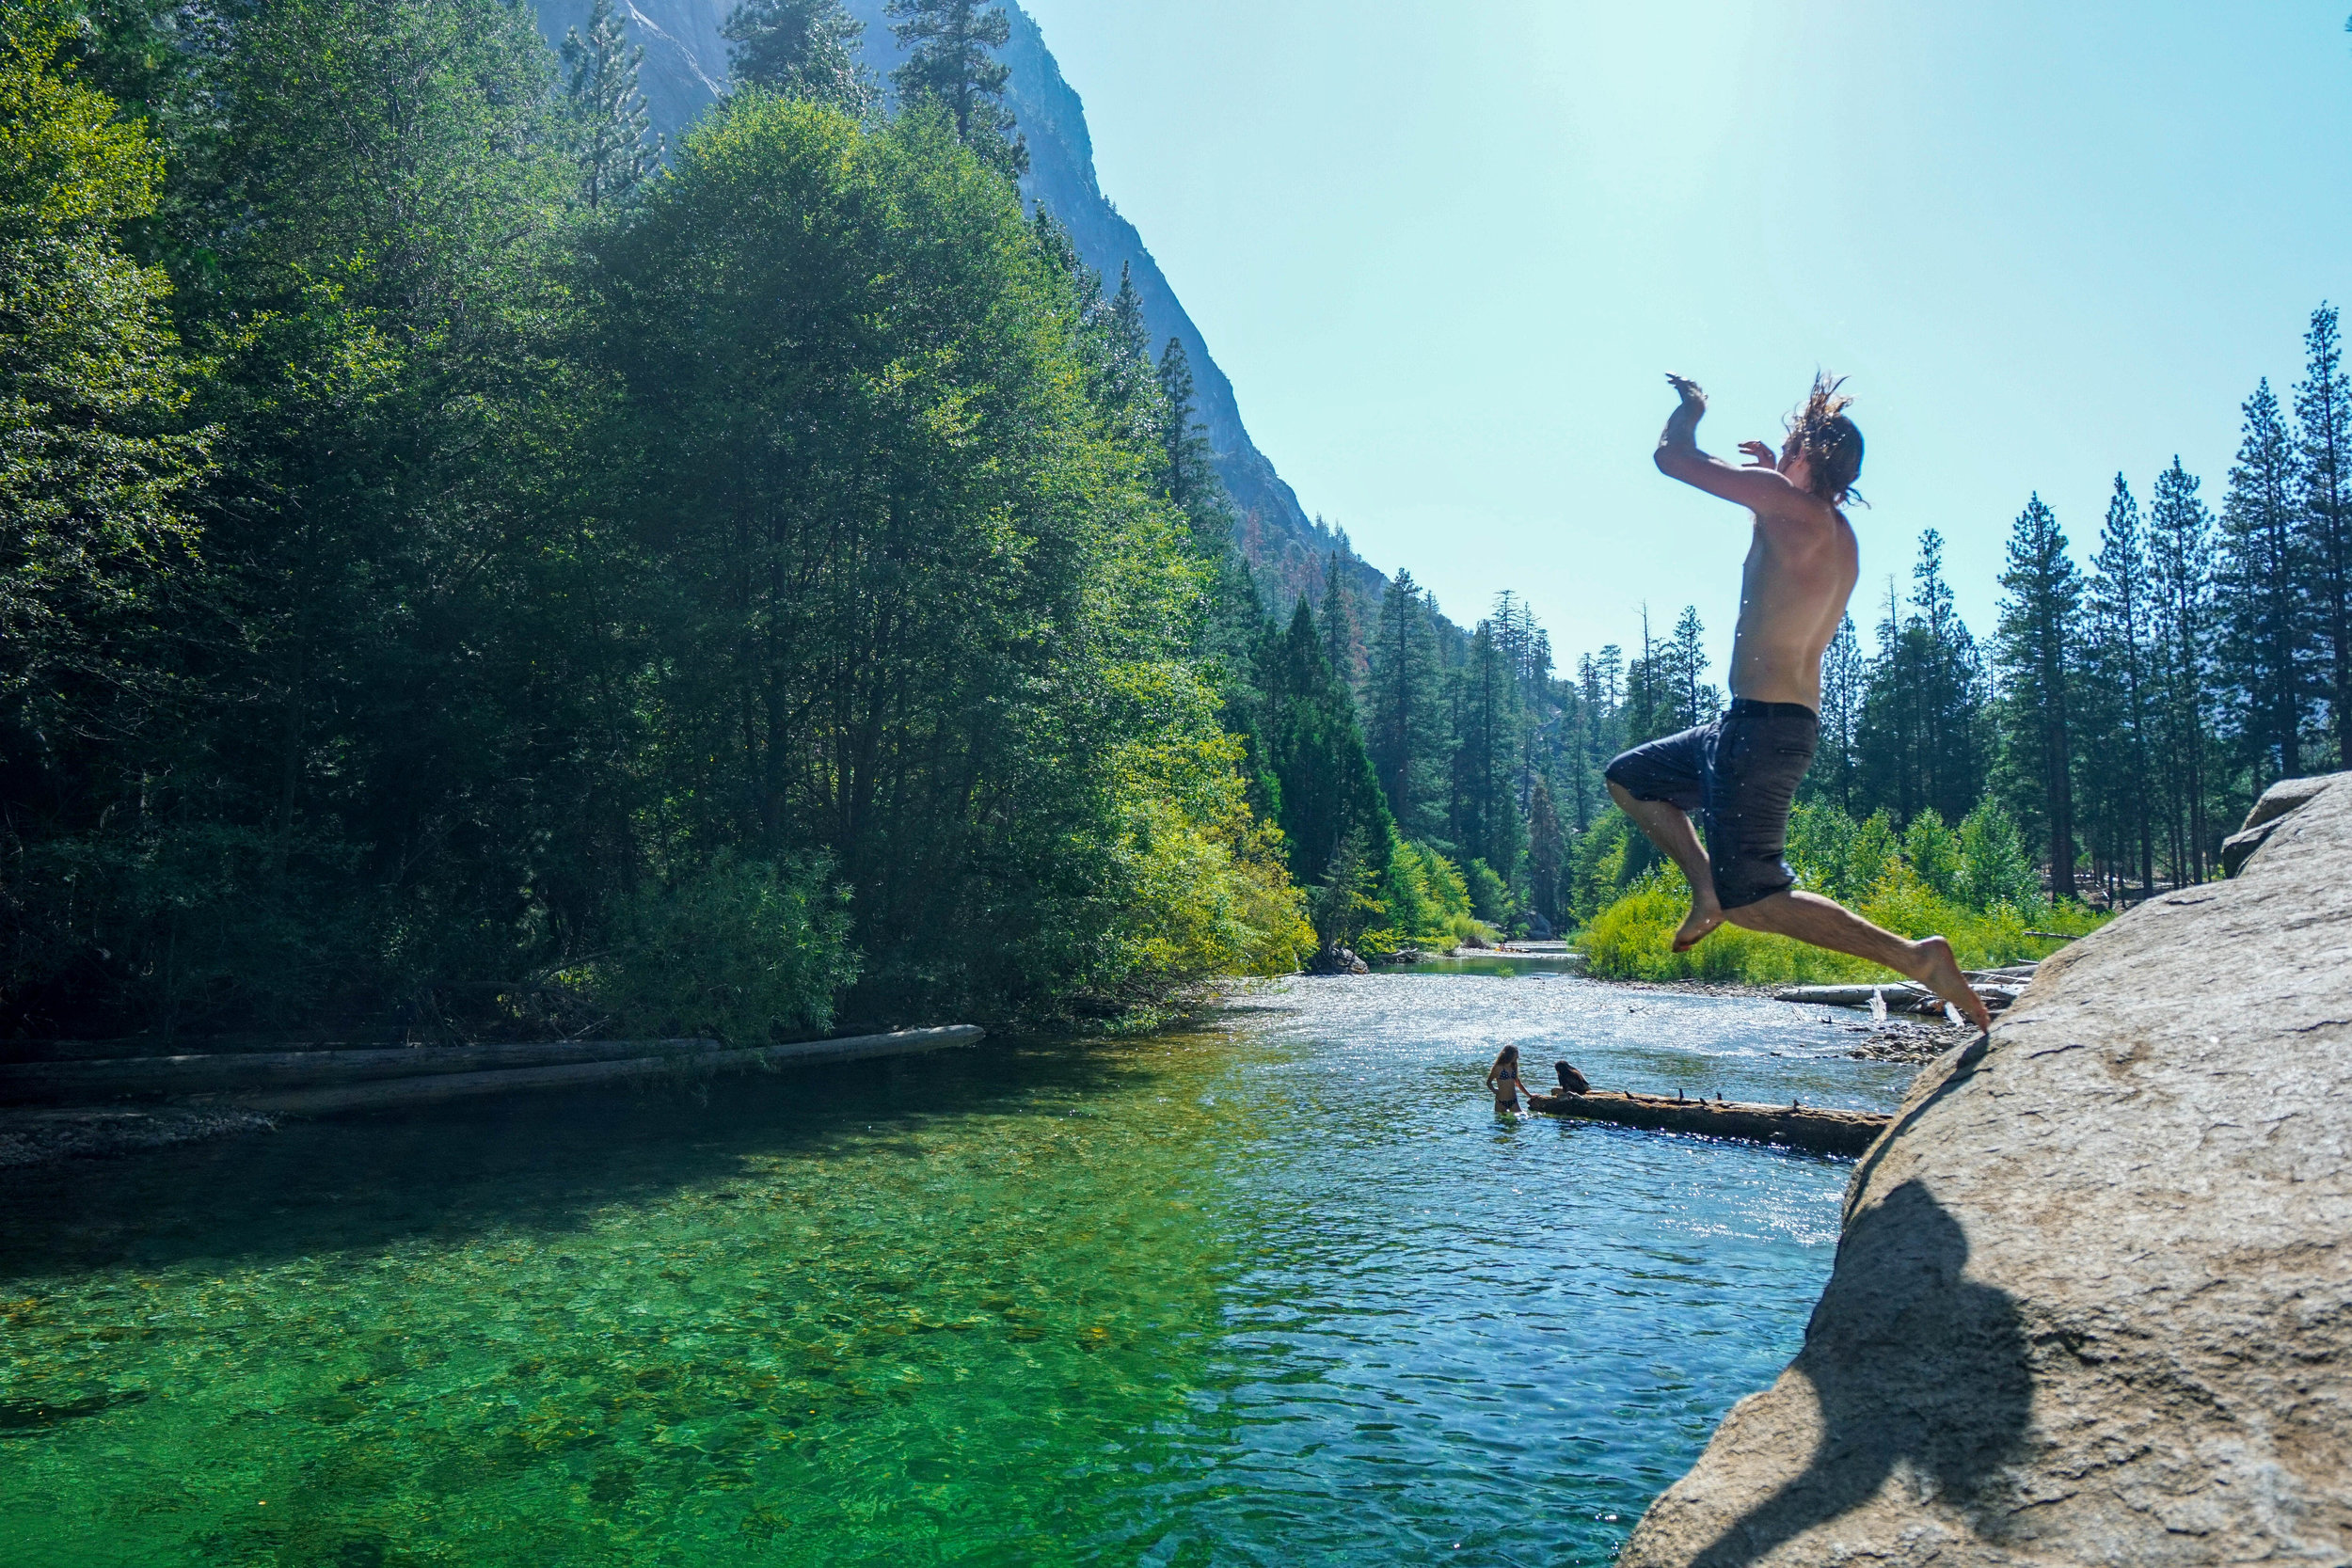 Nothing says summer like leap into ice cold Sierra Mountain water from a rock the legendary John Muir himself once sat upon!